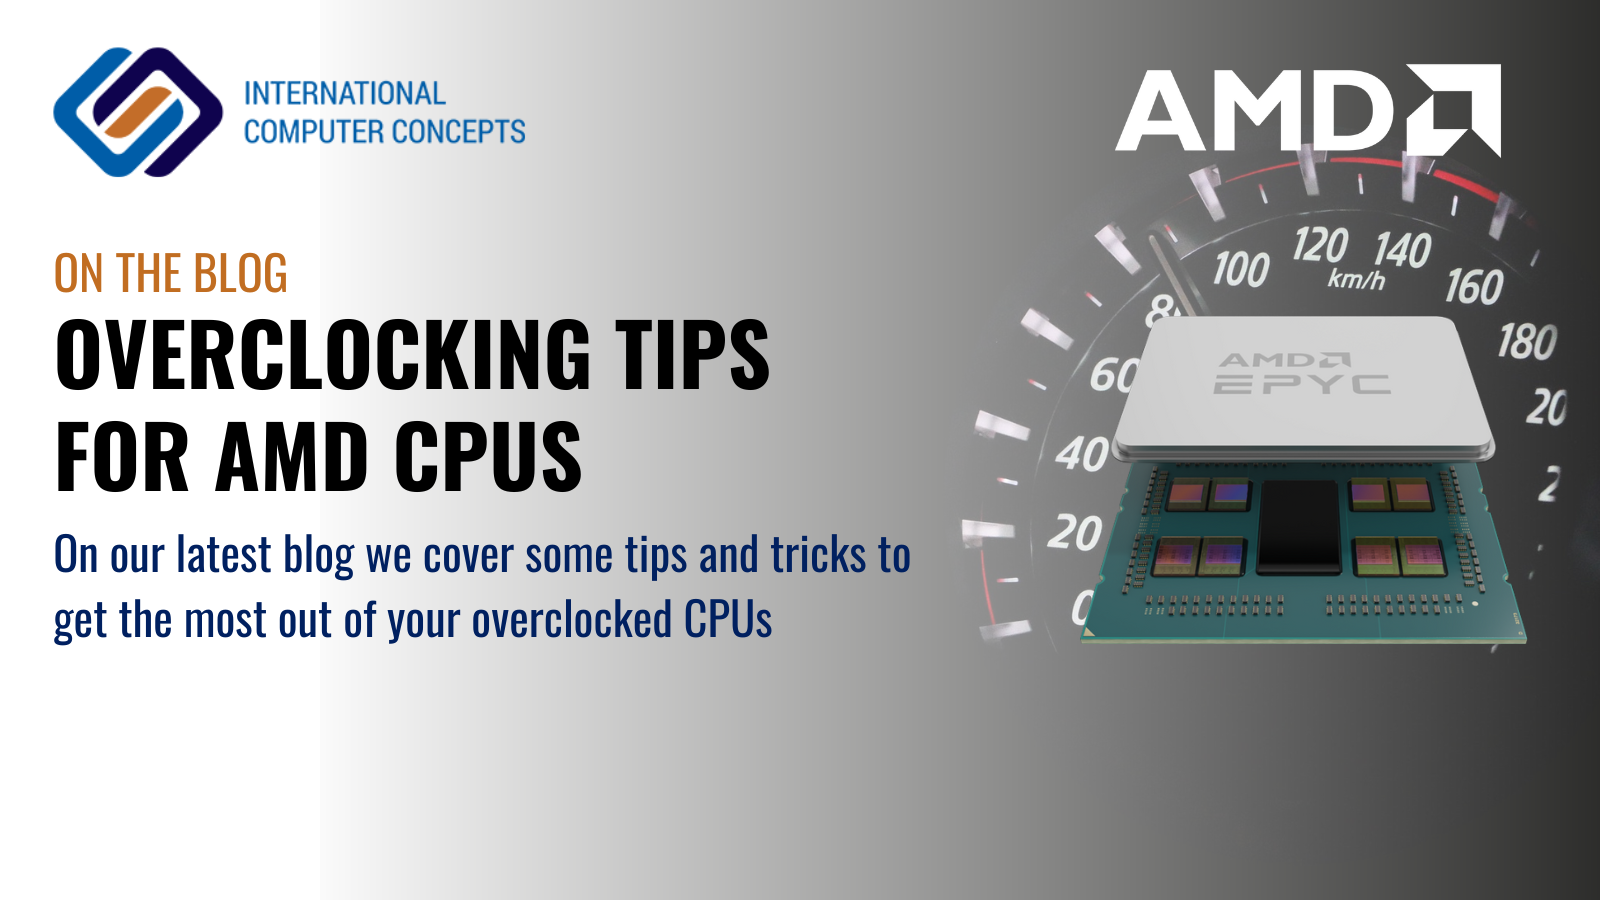 Overclocking tips for AMD CPUs